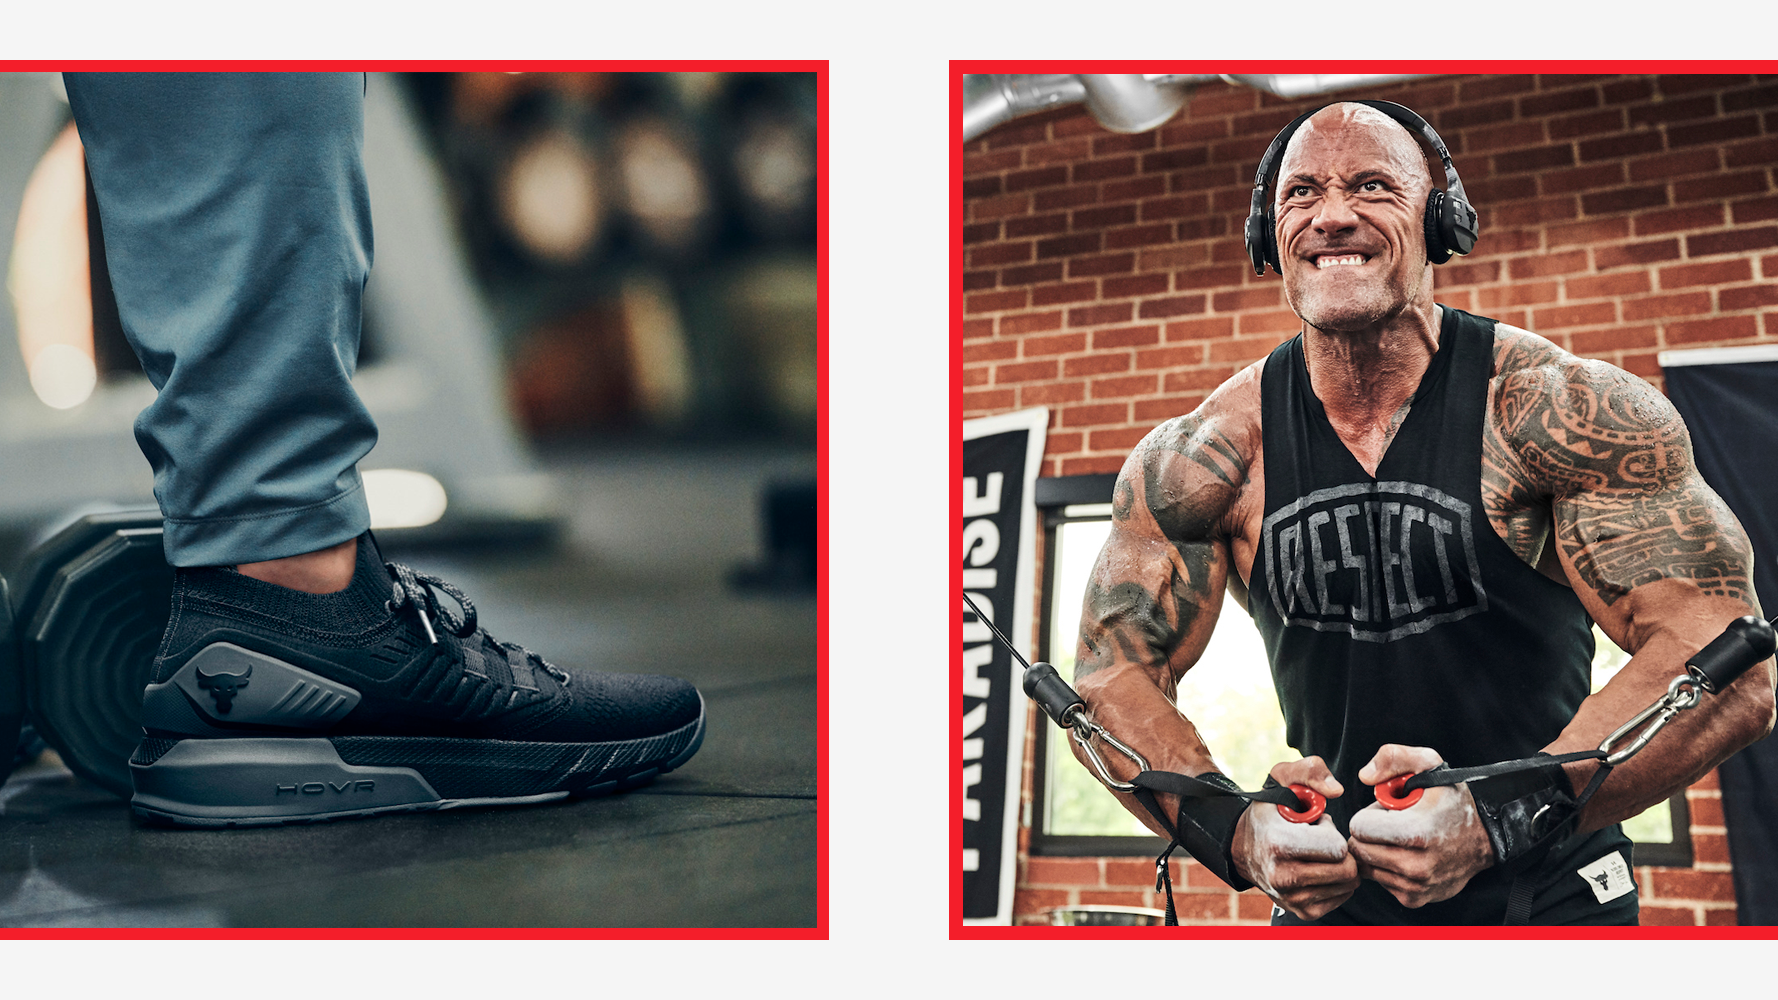 Shoes - Weightlifting, Training, CrossFit®, & More